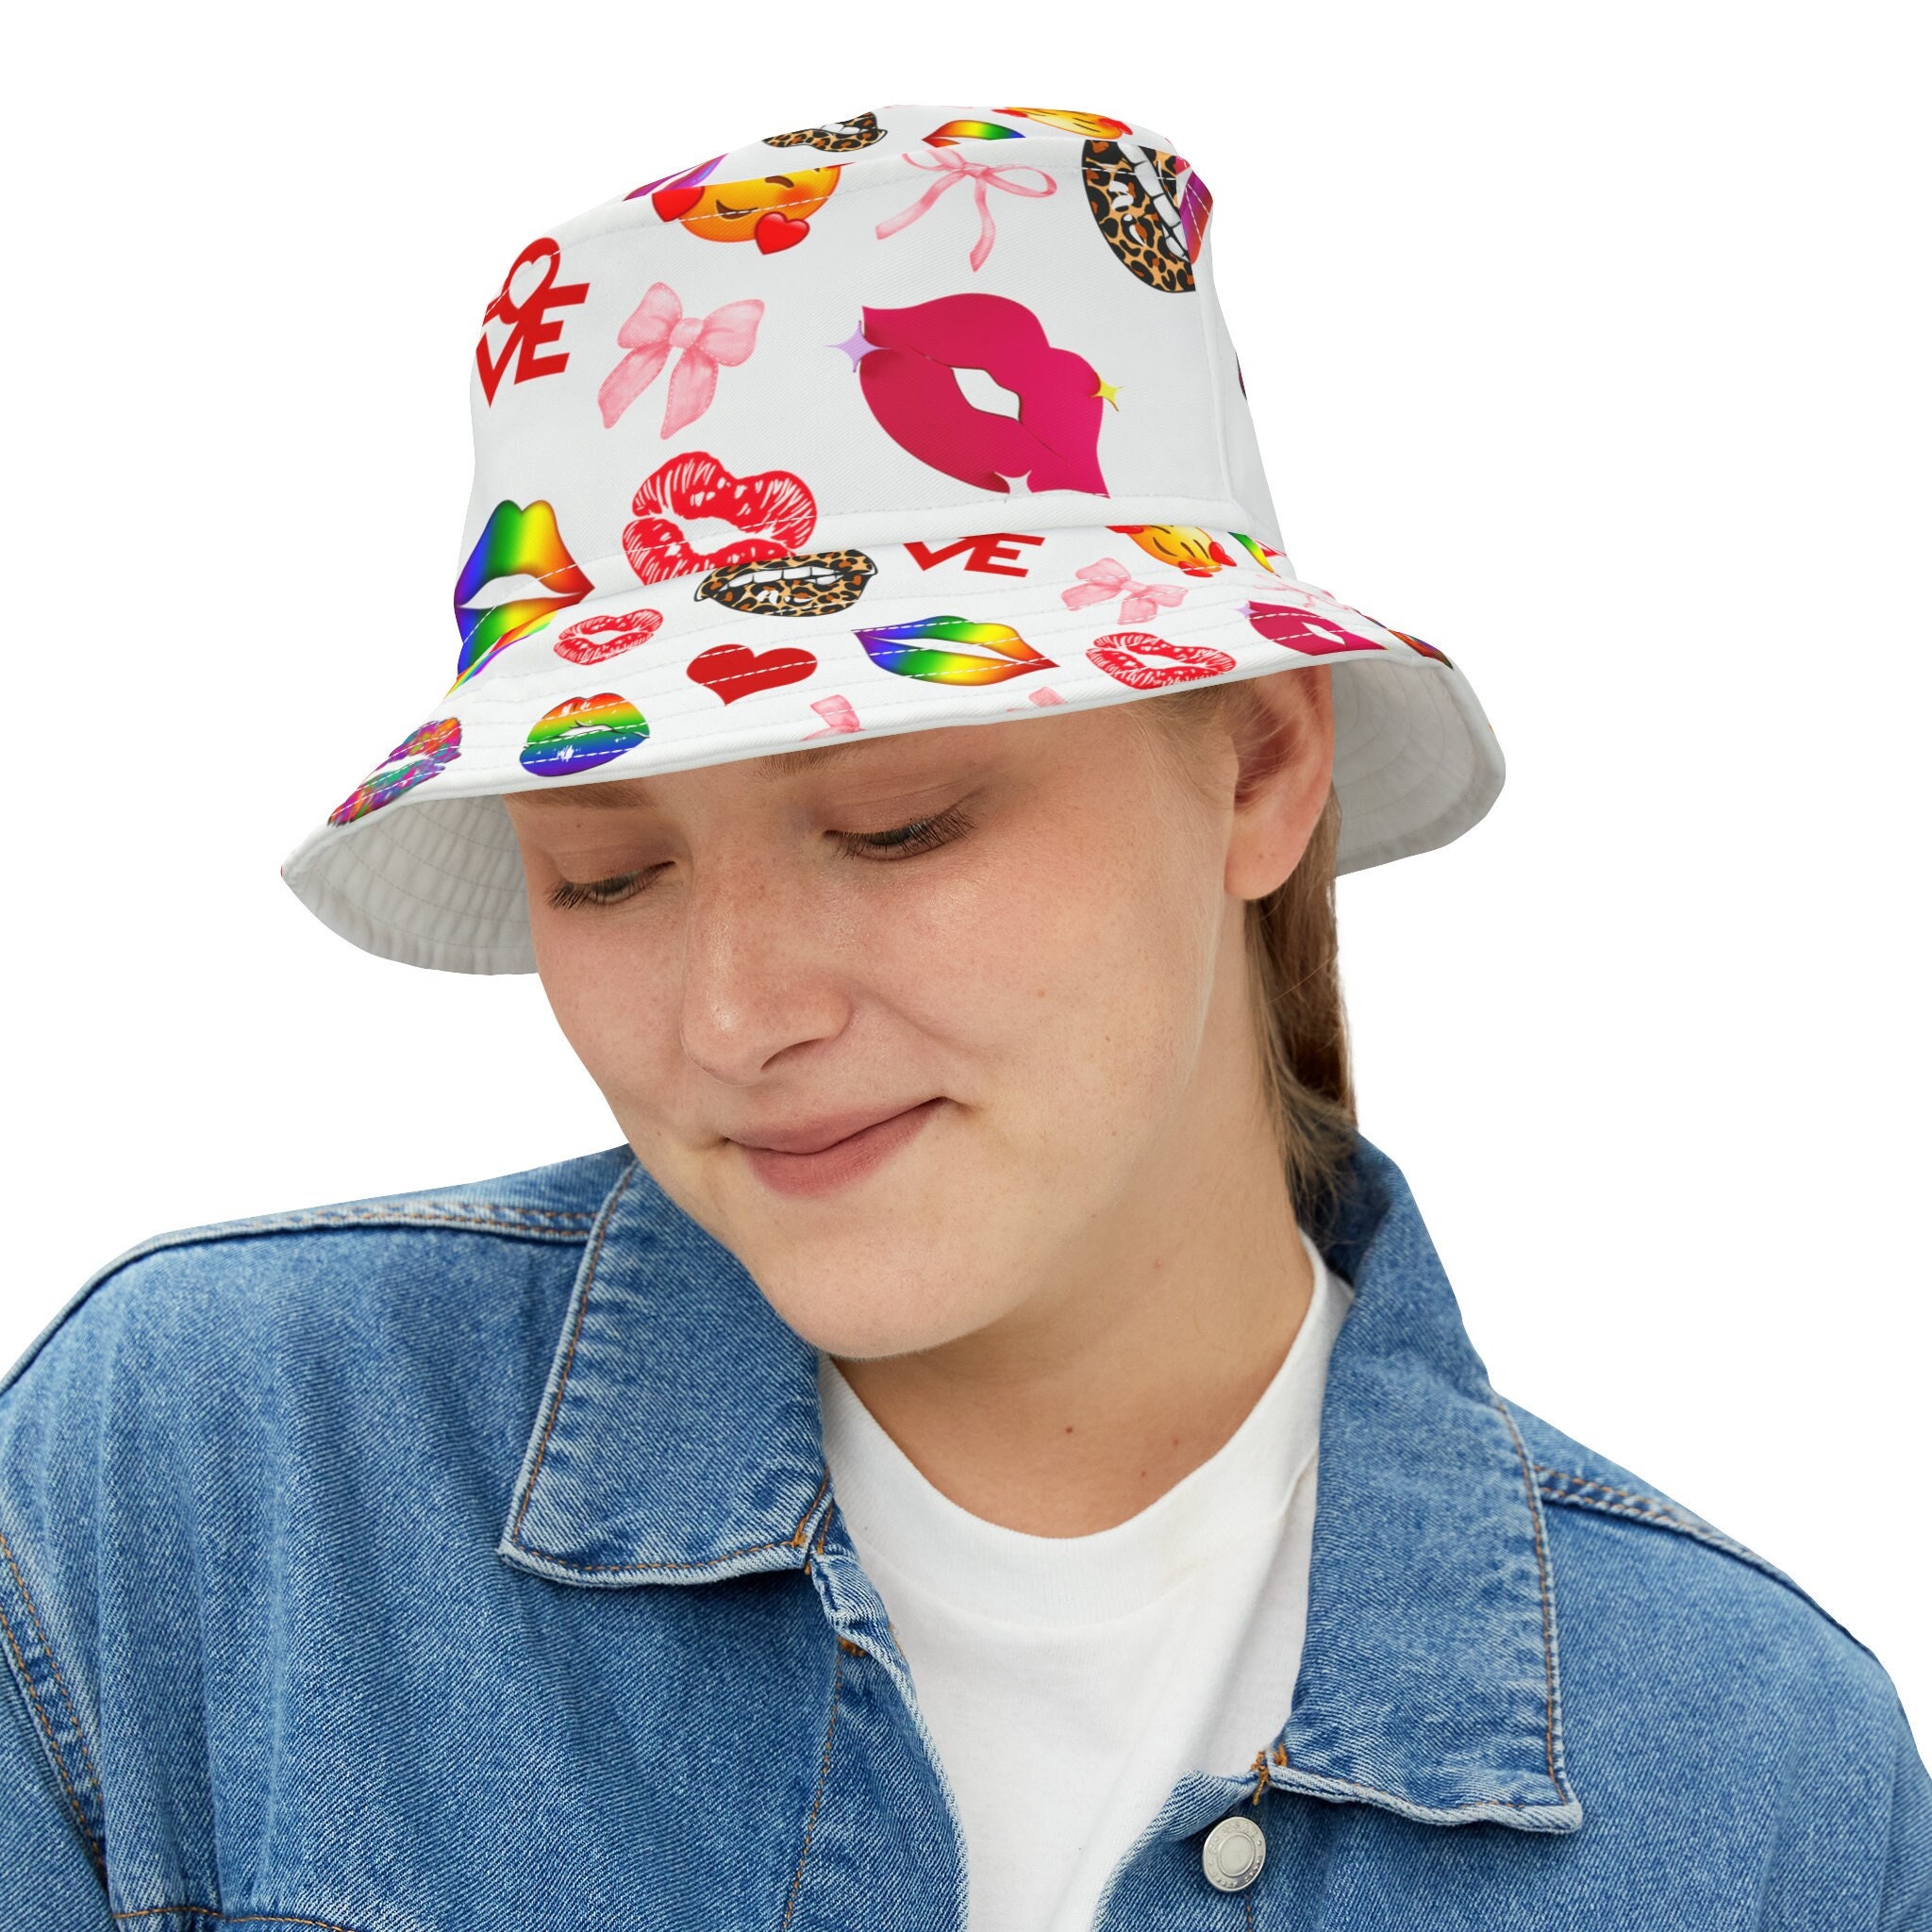 Summer Fun Top Hat. Fashion Top Hat for the Sun. Flirty Hat for